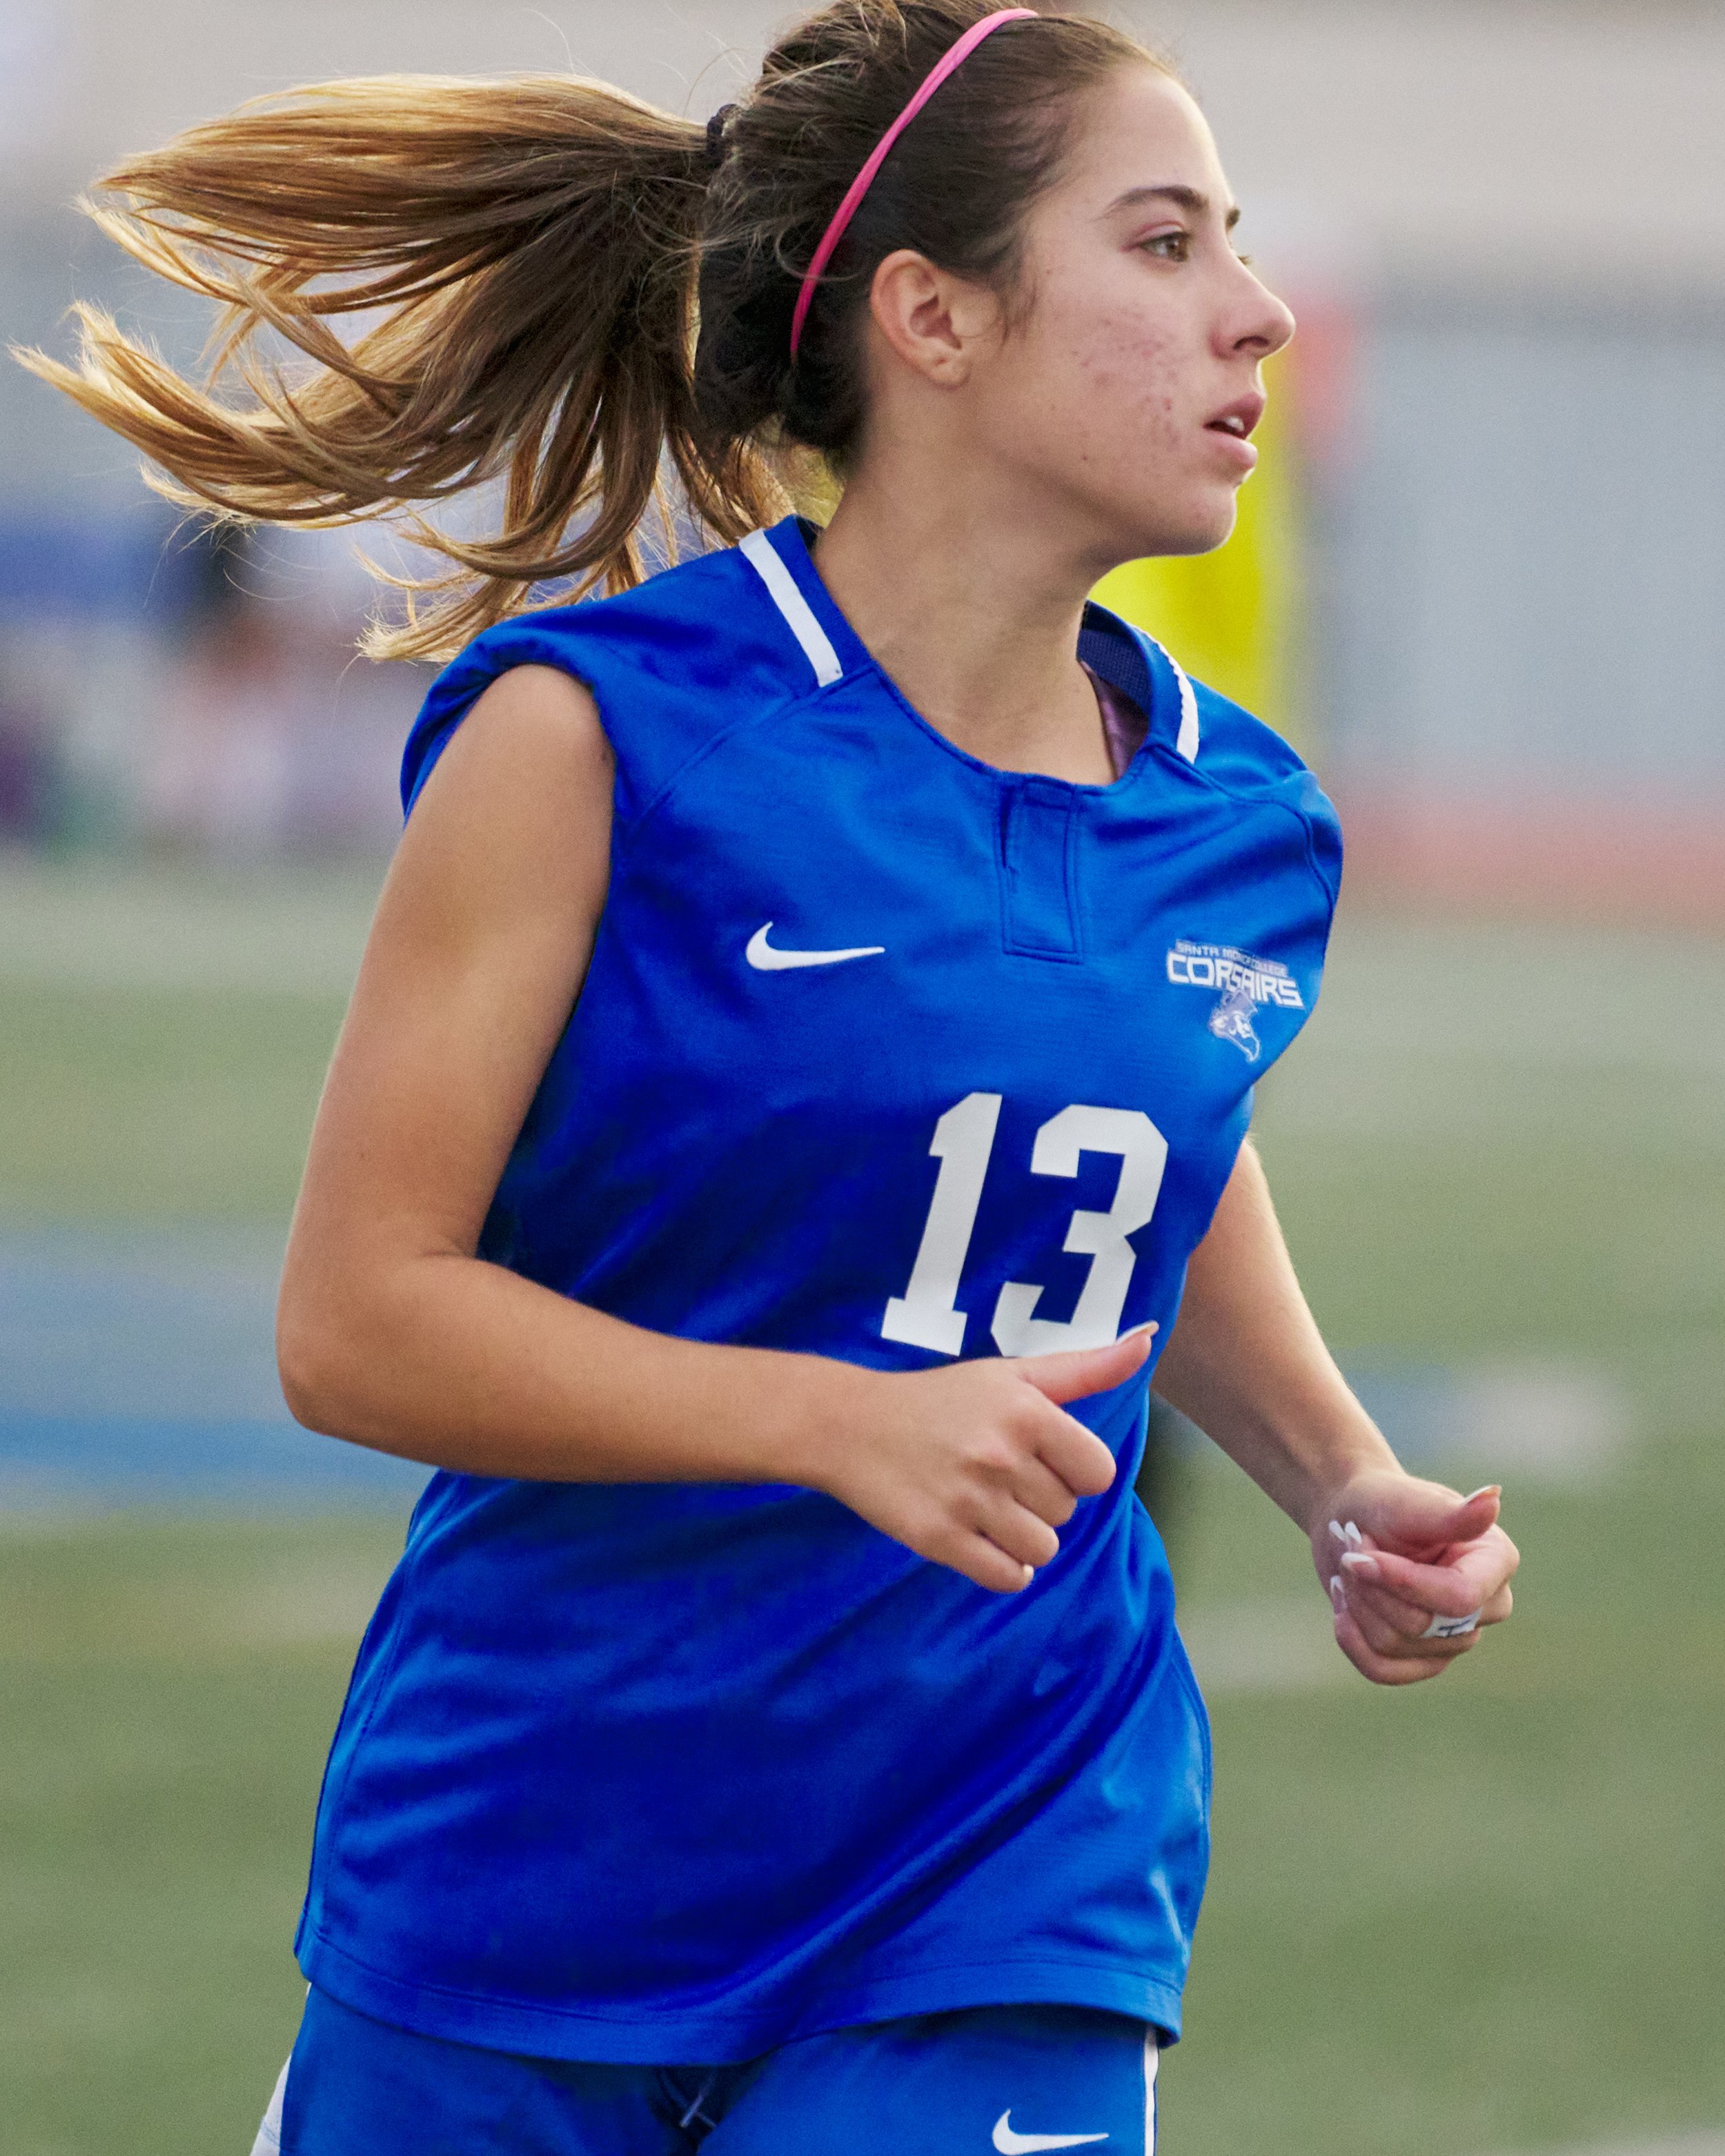  Santa Monica College Corsairs' Sophie Doumitt during the women's soccer match against the Los Angeles Valley College Monarchs on Tuesday, Nov. 1, 2022, at Corsair Field in Santa Monica, Calif. The Corsairs won 2-1. (Nicholas McCall | The Corsair) 